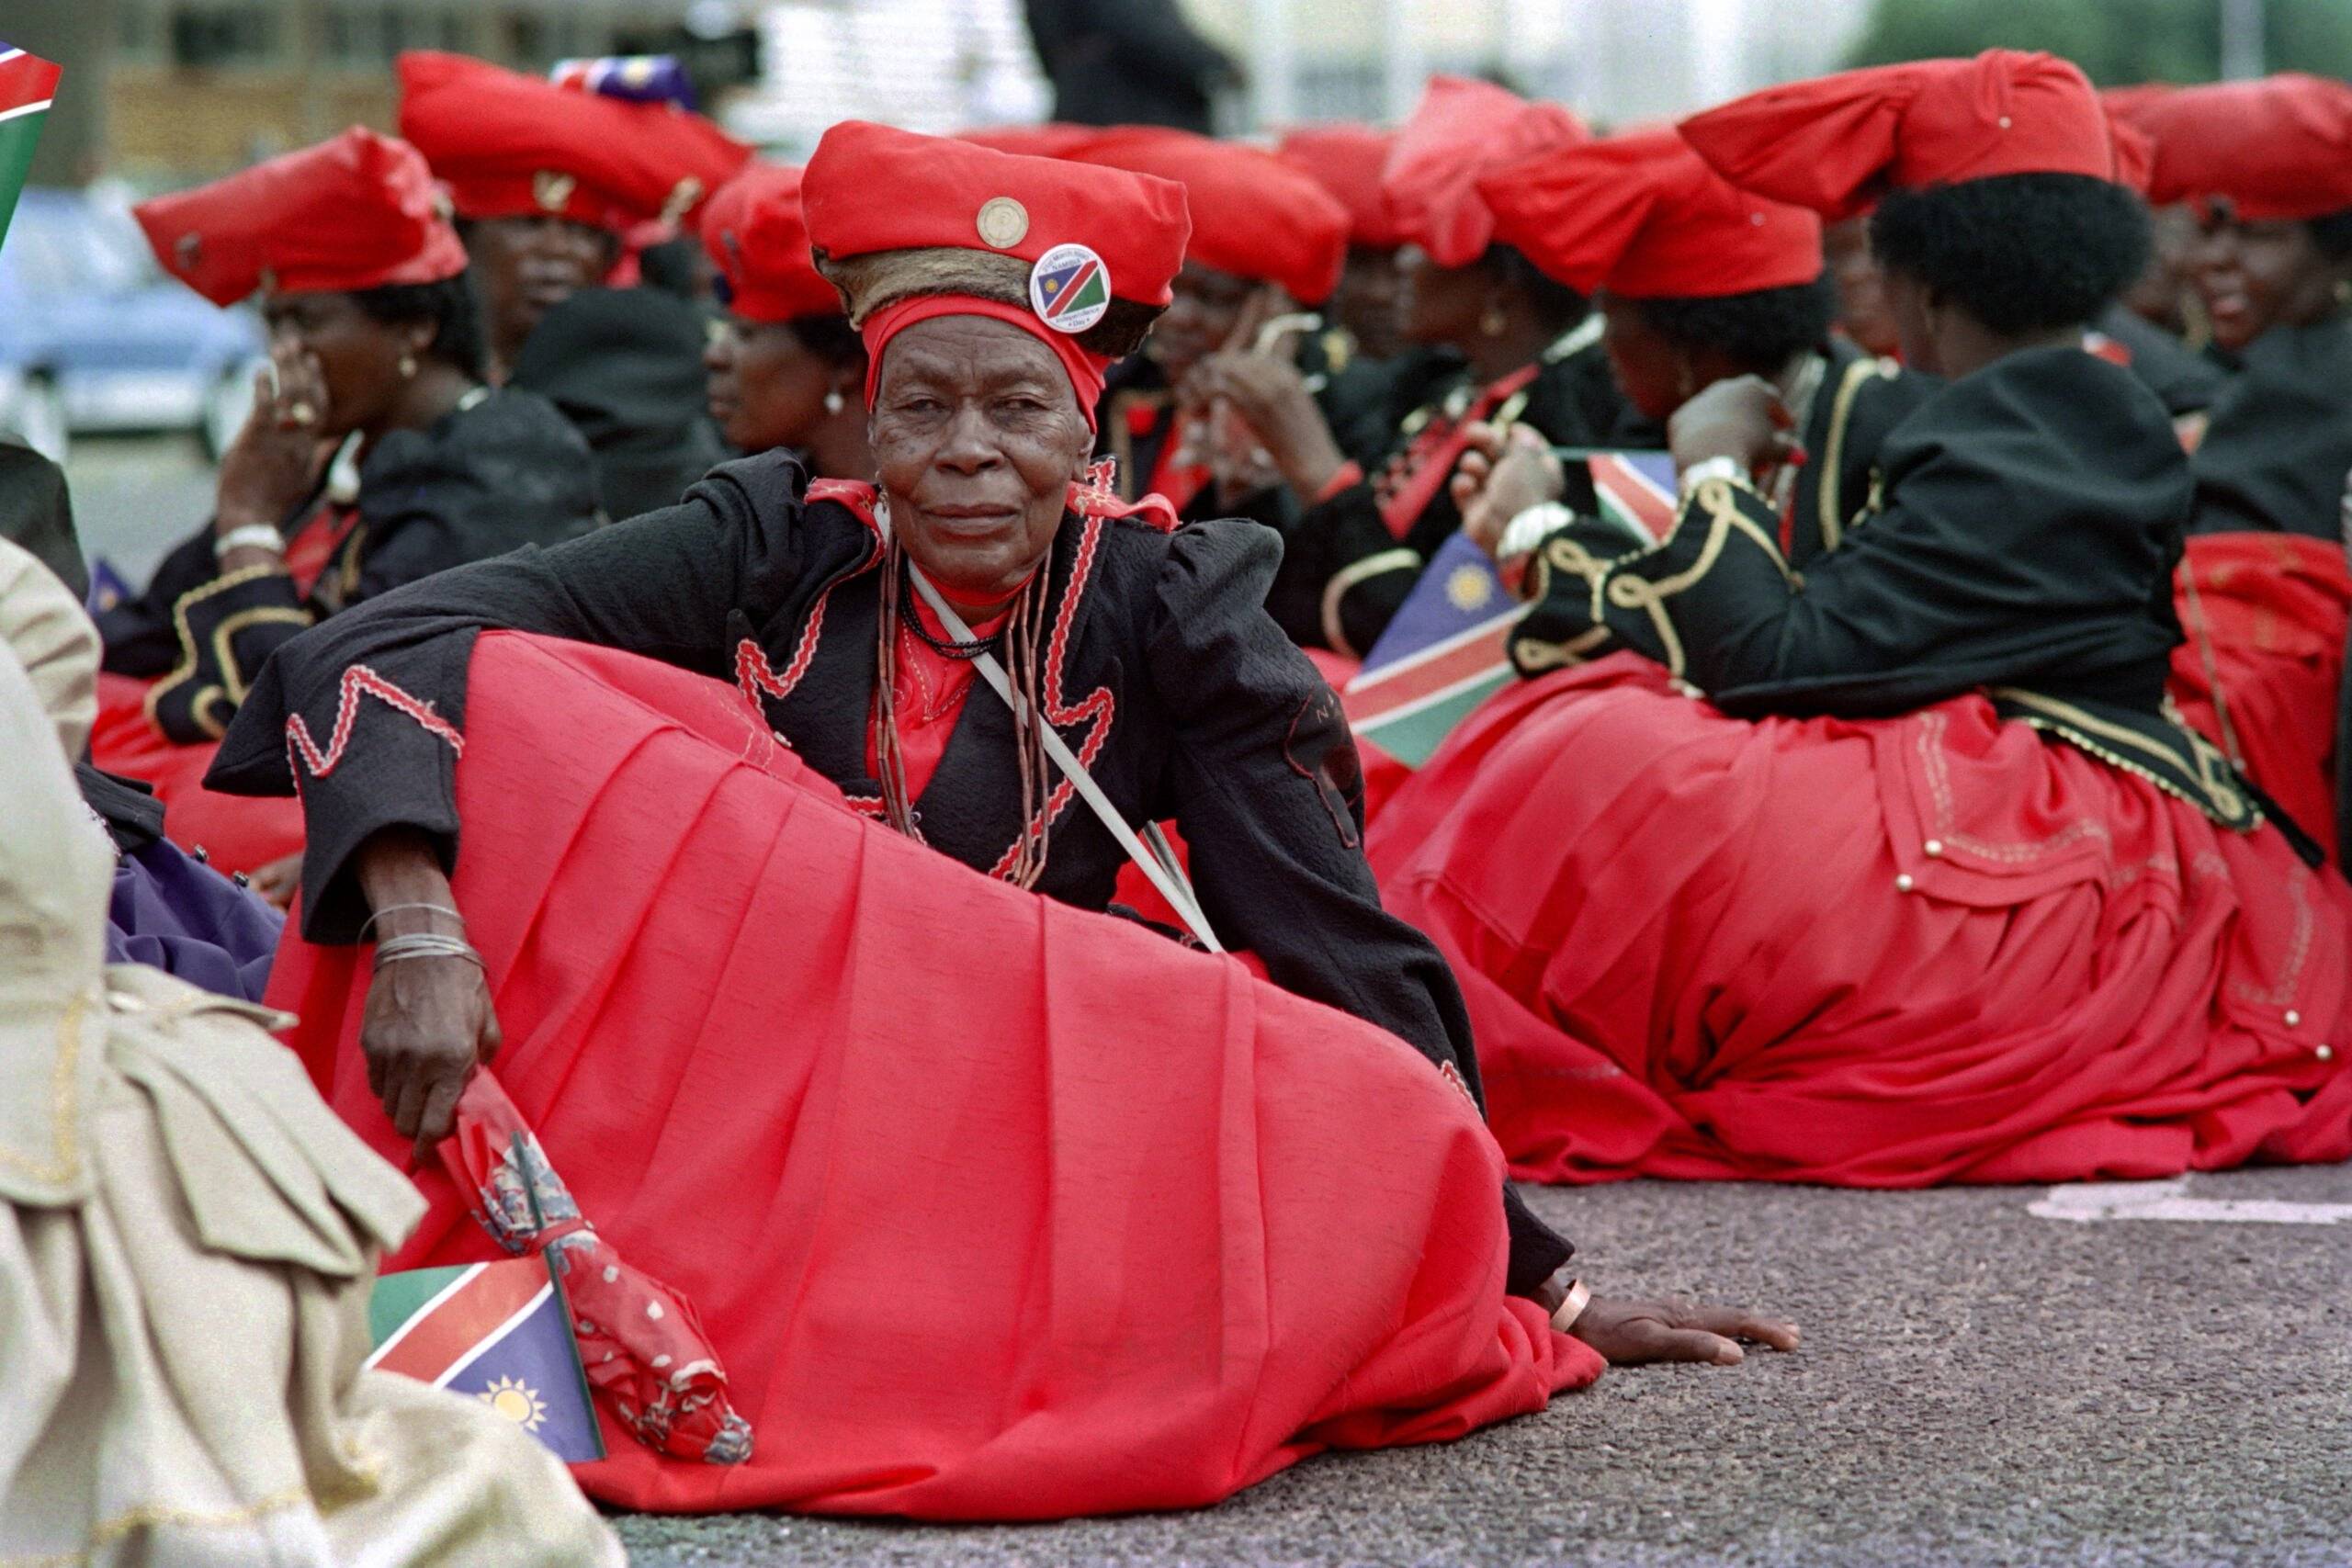 Herero women in traditional attire participate in a march in support of the country's independence from South Africa after 23 years of war, on March 18, 1990 in Windhoek. - Namibia will formally gain independence from South Africa at midnight on March 21, 1990. The capital city Windhoek will host over 150 heads of state for the occasion. (Photo by Alexander JOE / AFP)